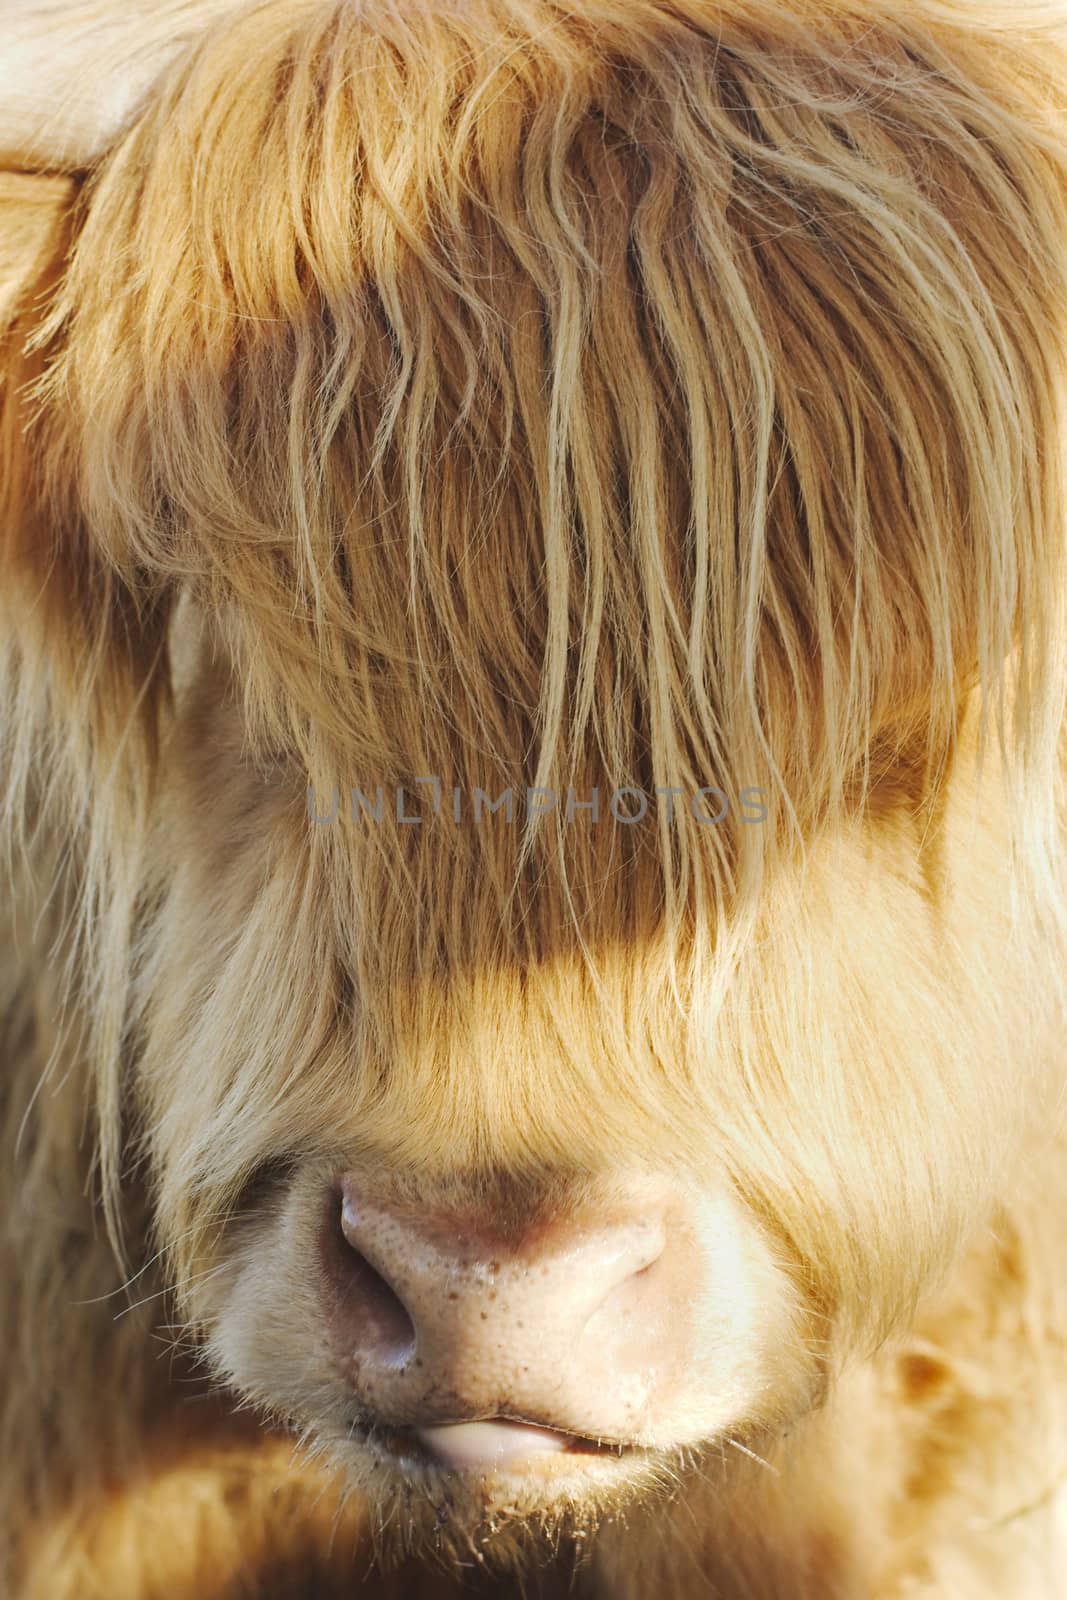 A highland cow that was roaming at Dartmoor